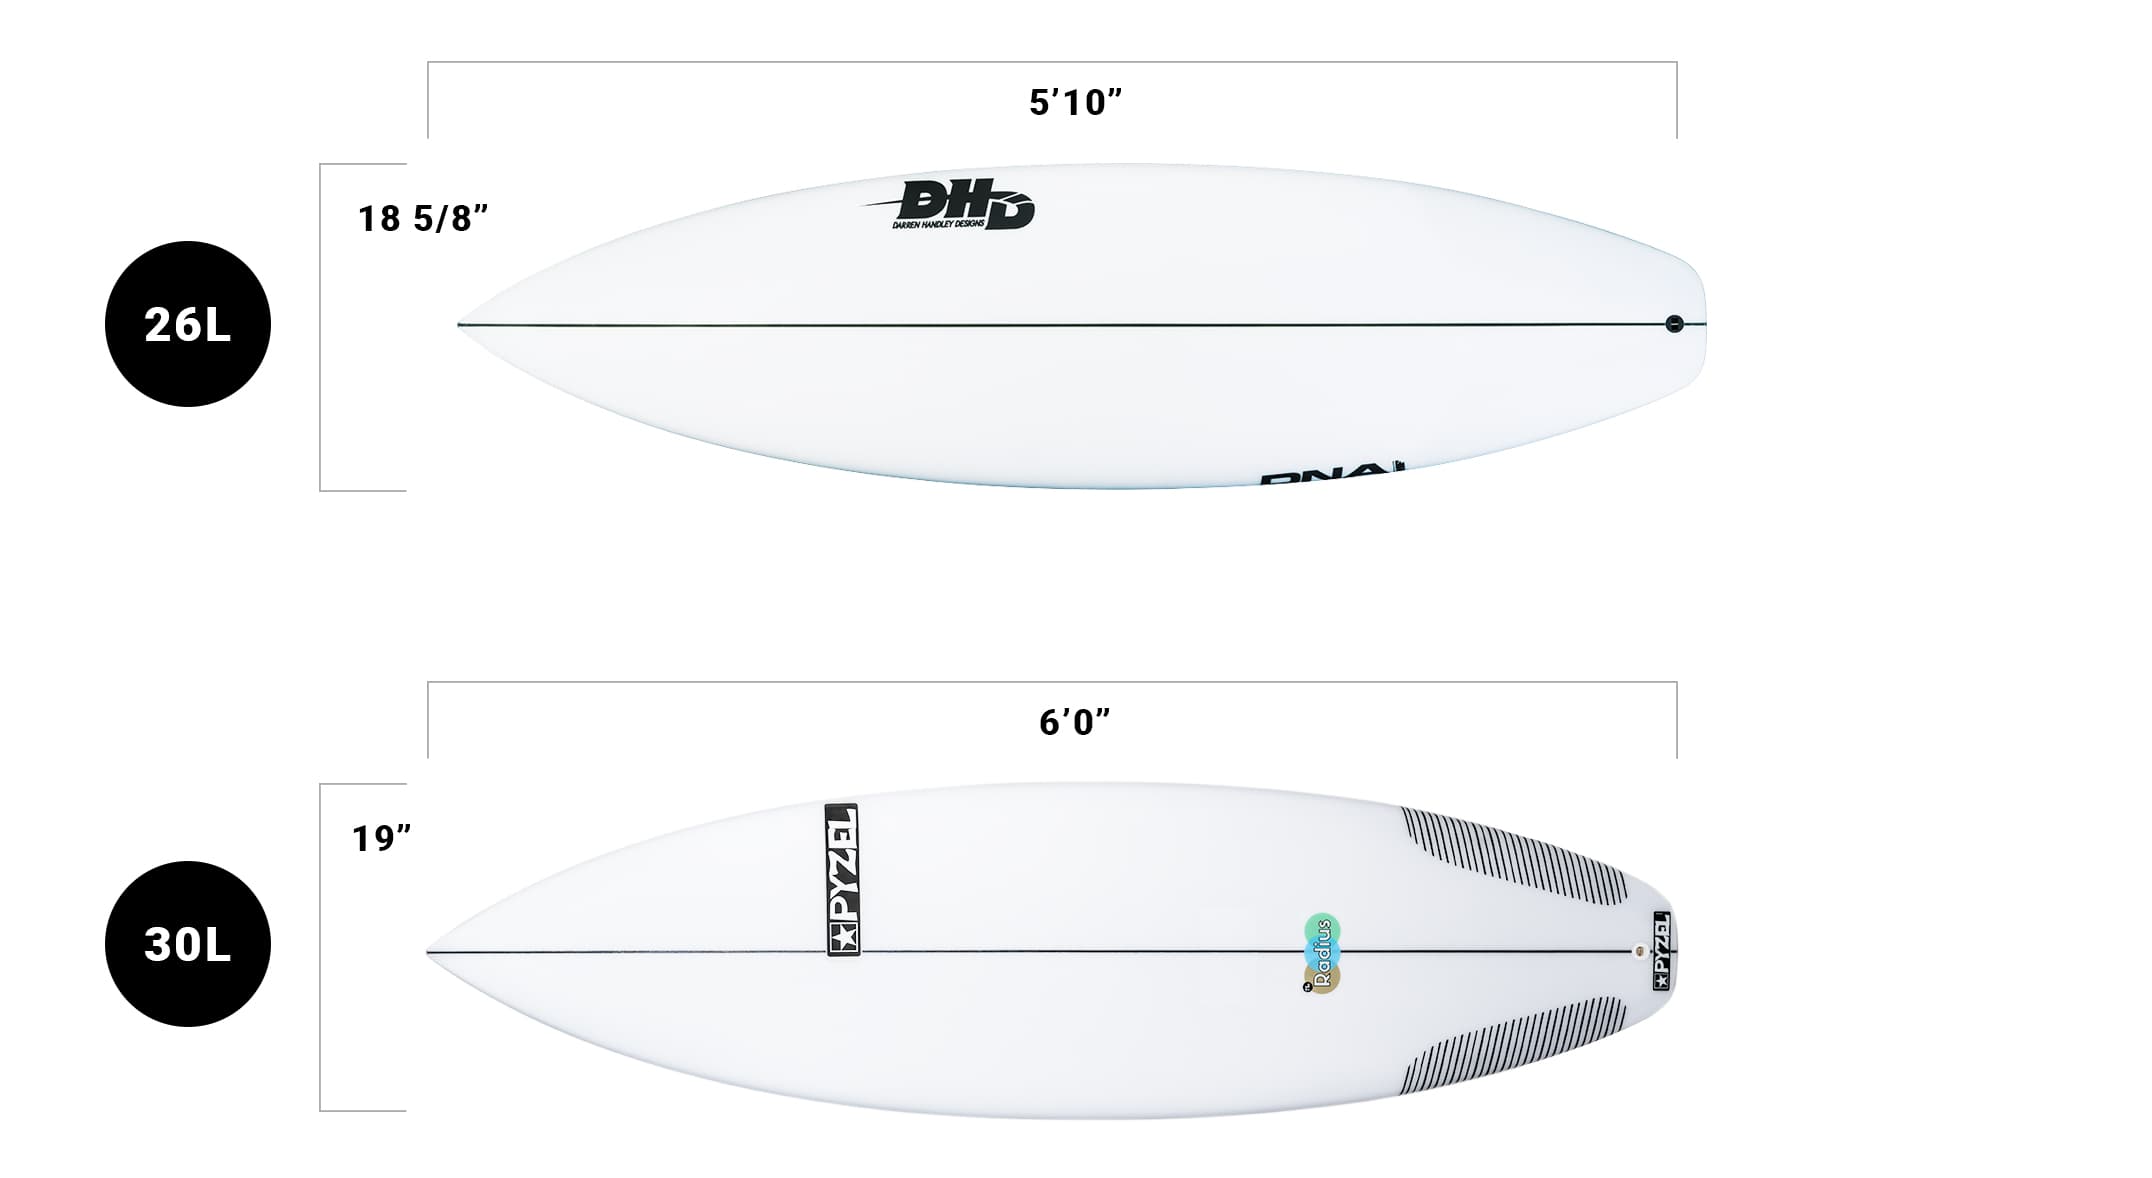 Finding the right Surfboard